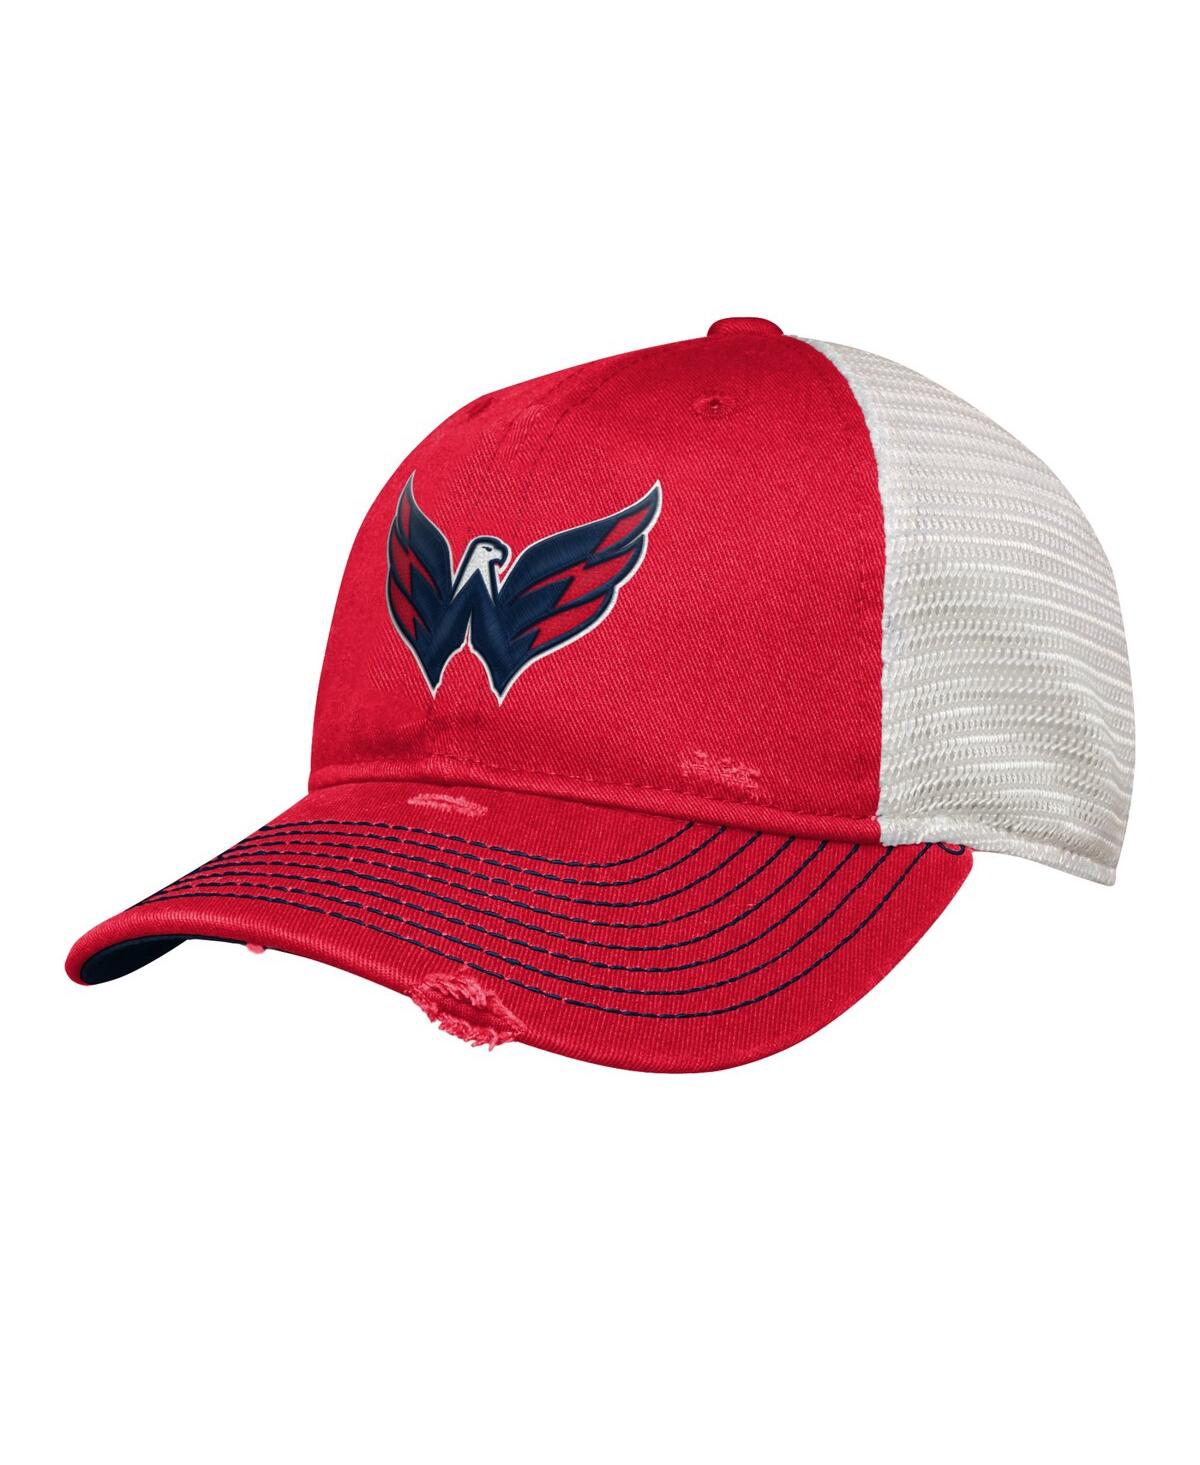 Outerstuff Kids' Youth Boys And Girls Red Distressed Washington Capitals Slouch Trucker Adjustable Hat